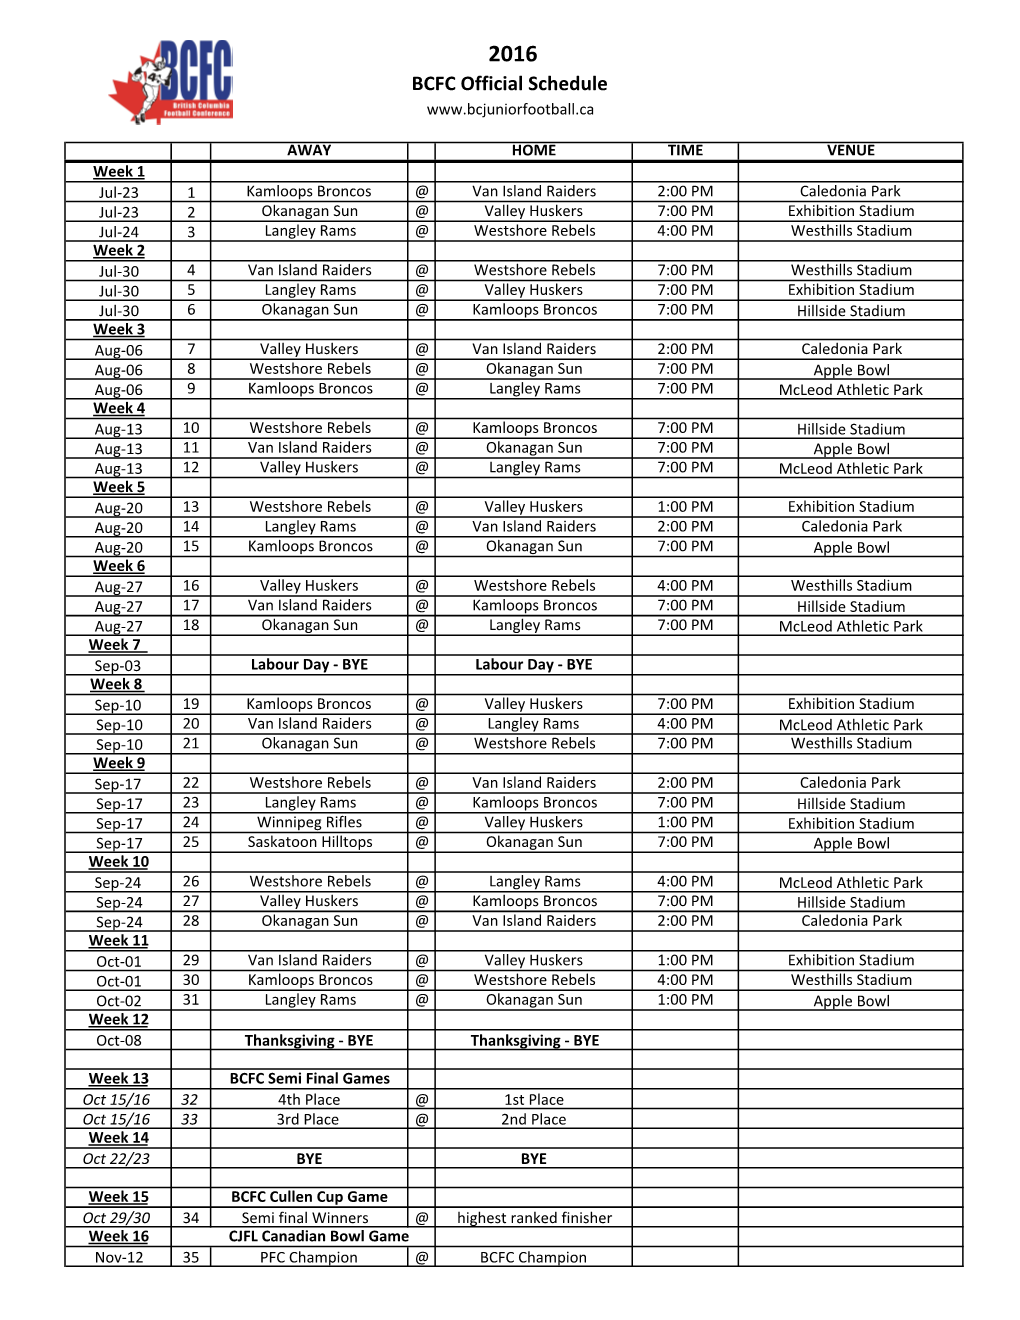 2016 BCFC Official Schedule